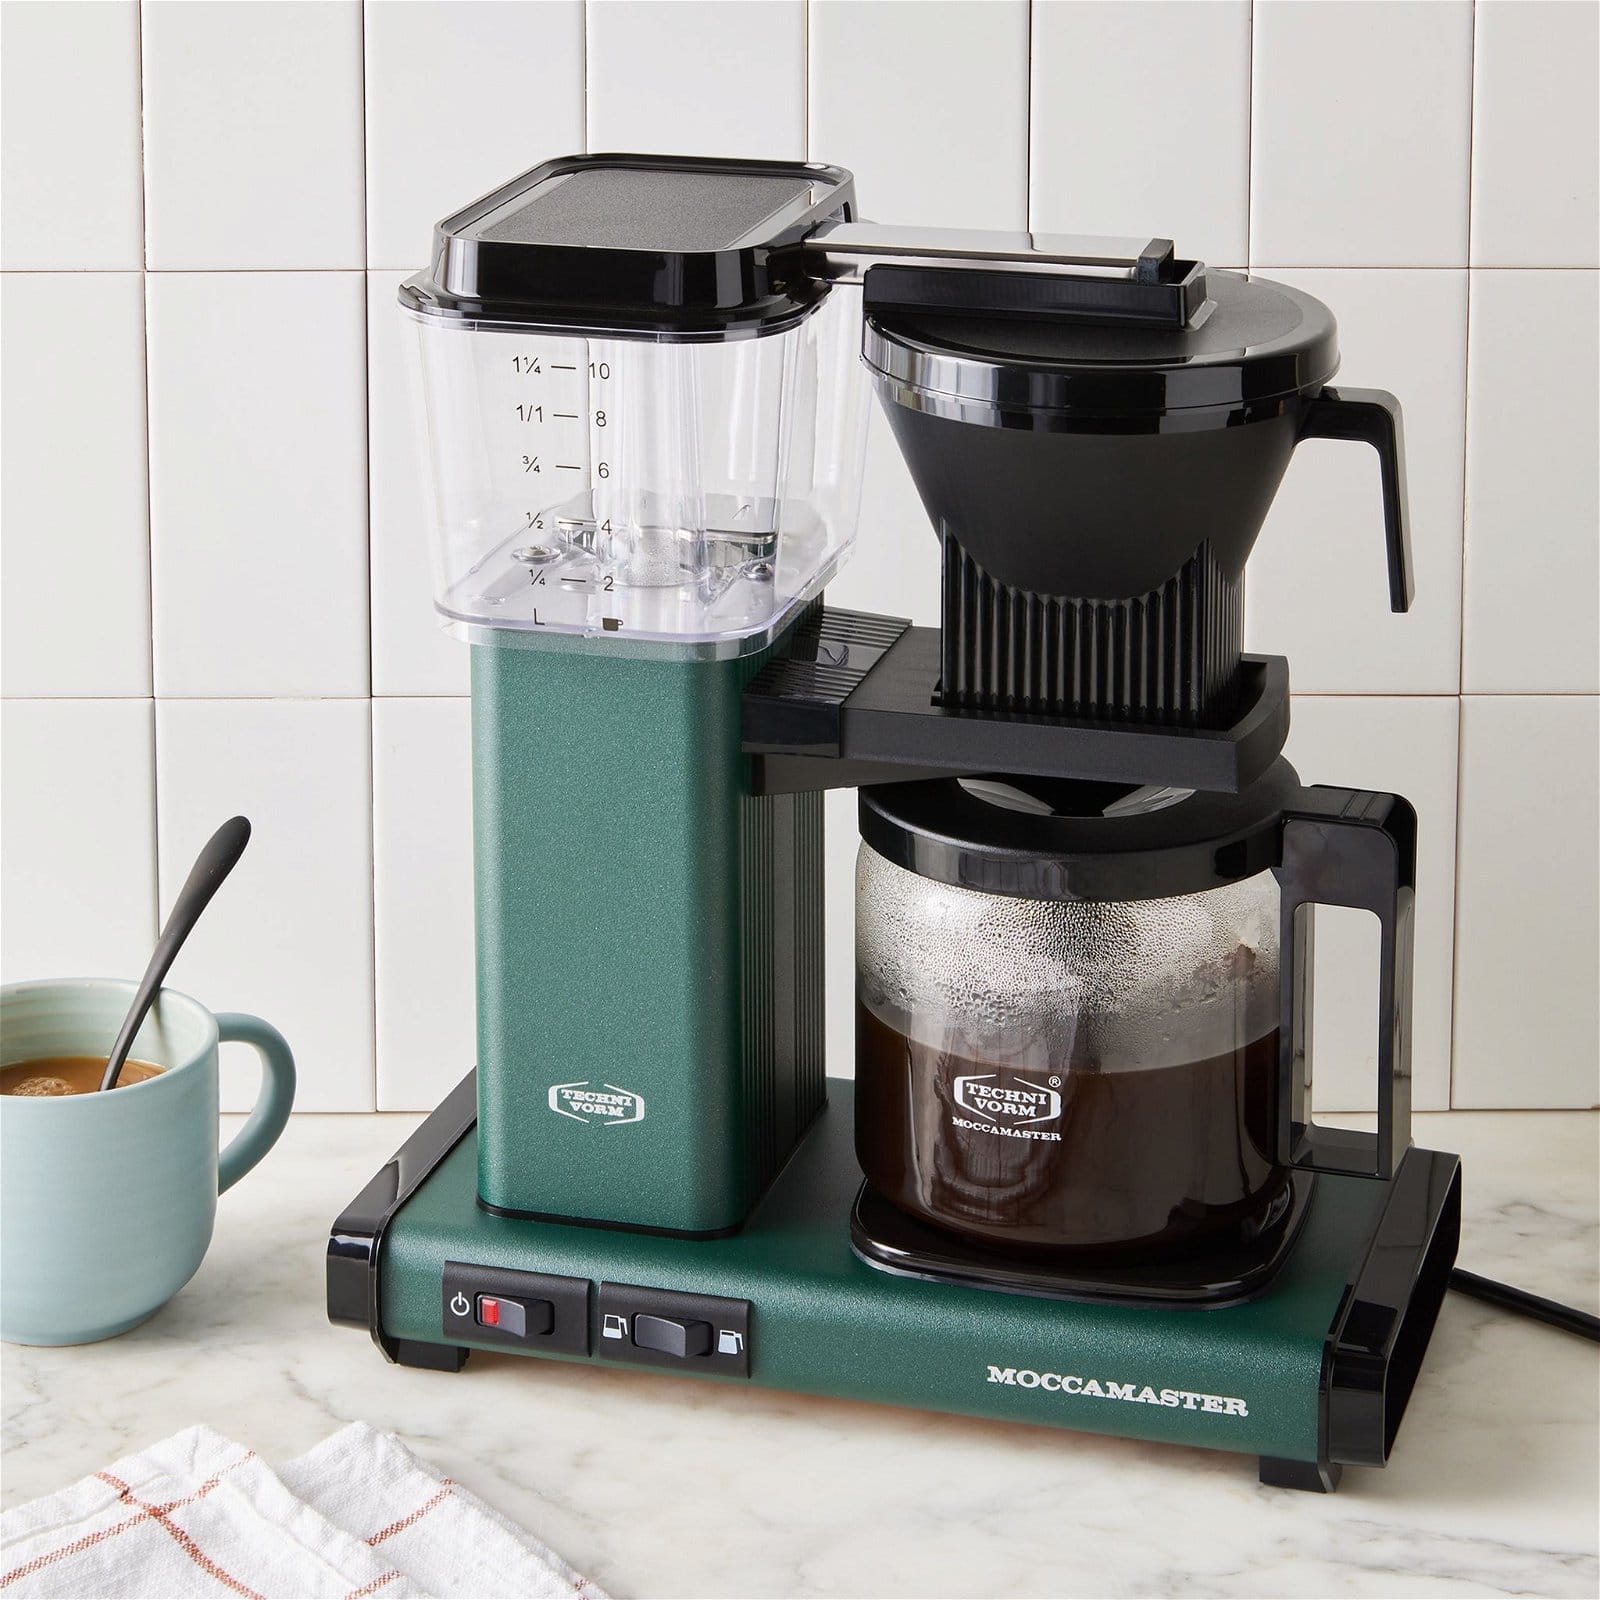 Technivorm Moccamaster 10-Cup Coffee Maker with Glass Carafe